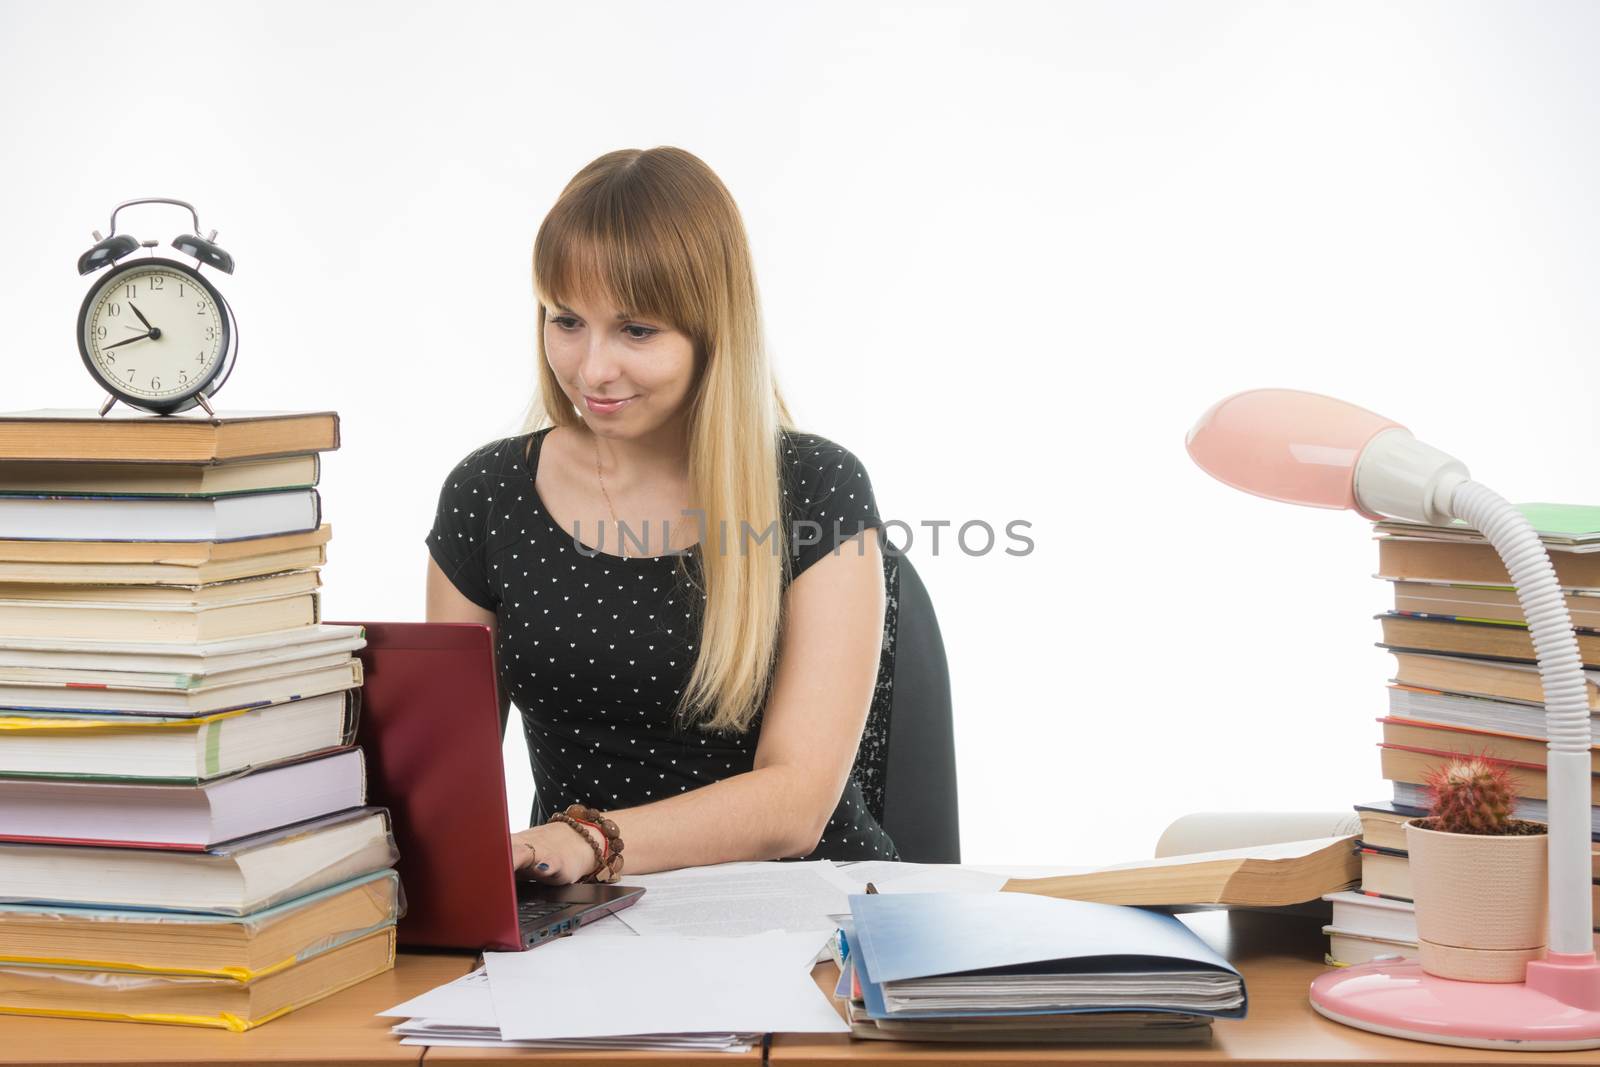 The girl behind the desk littered with books smiling in a laptop information gathering